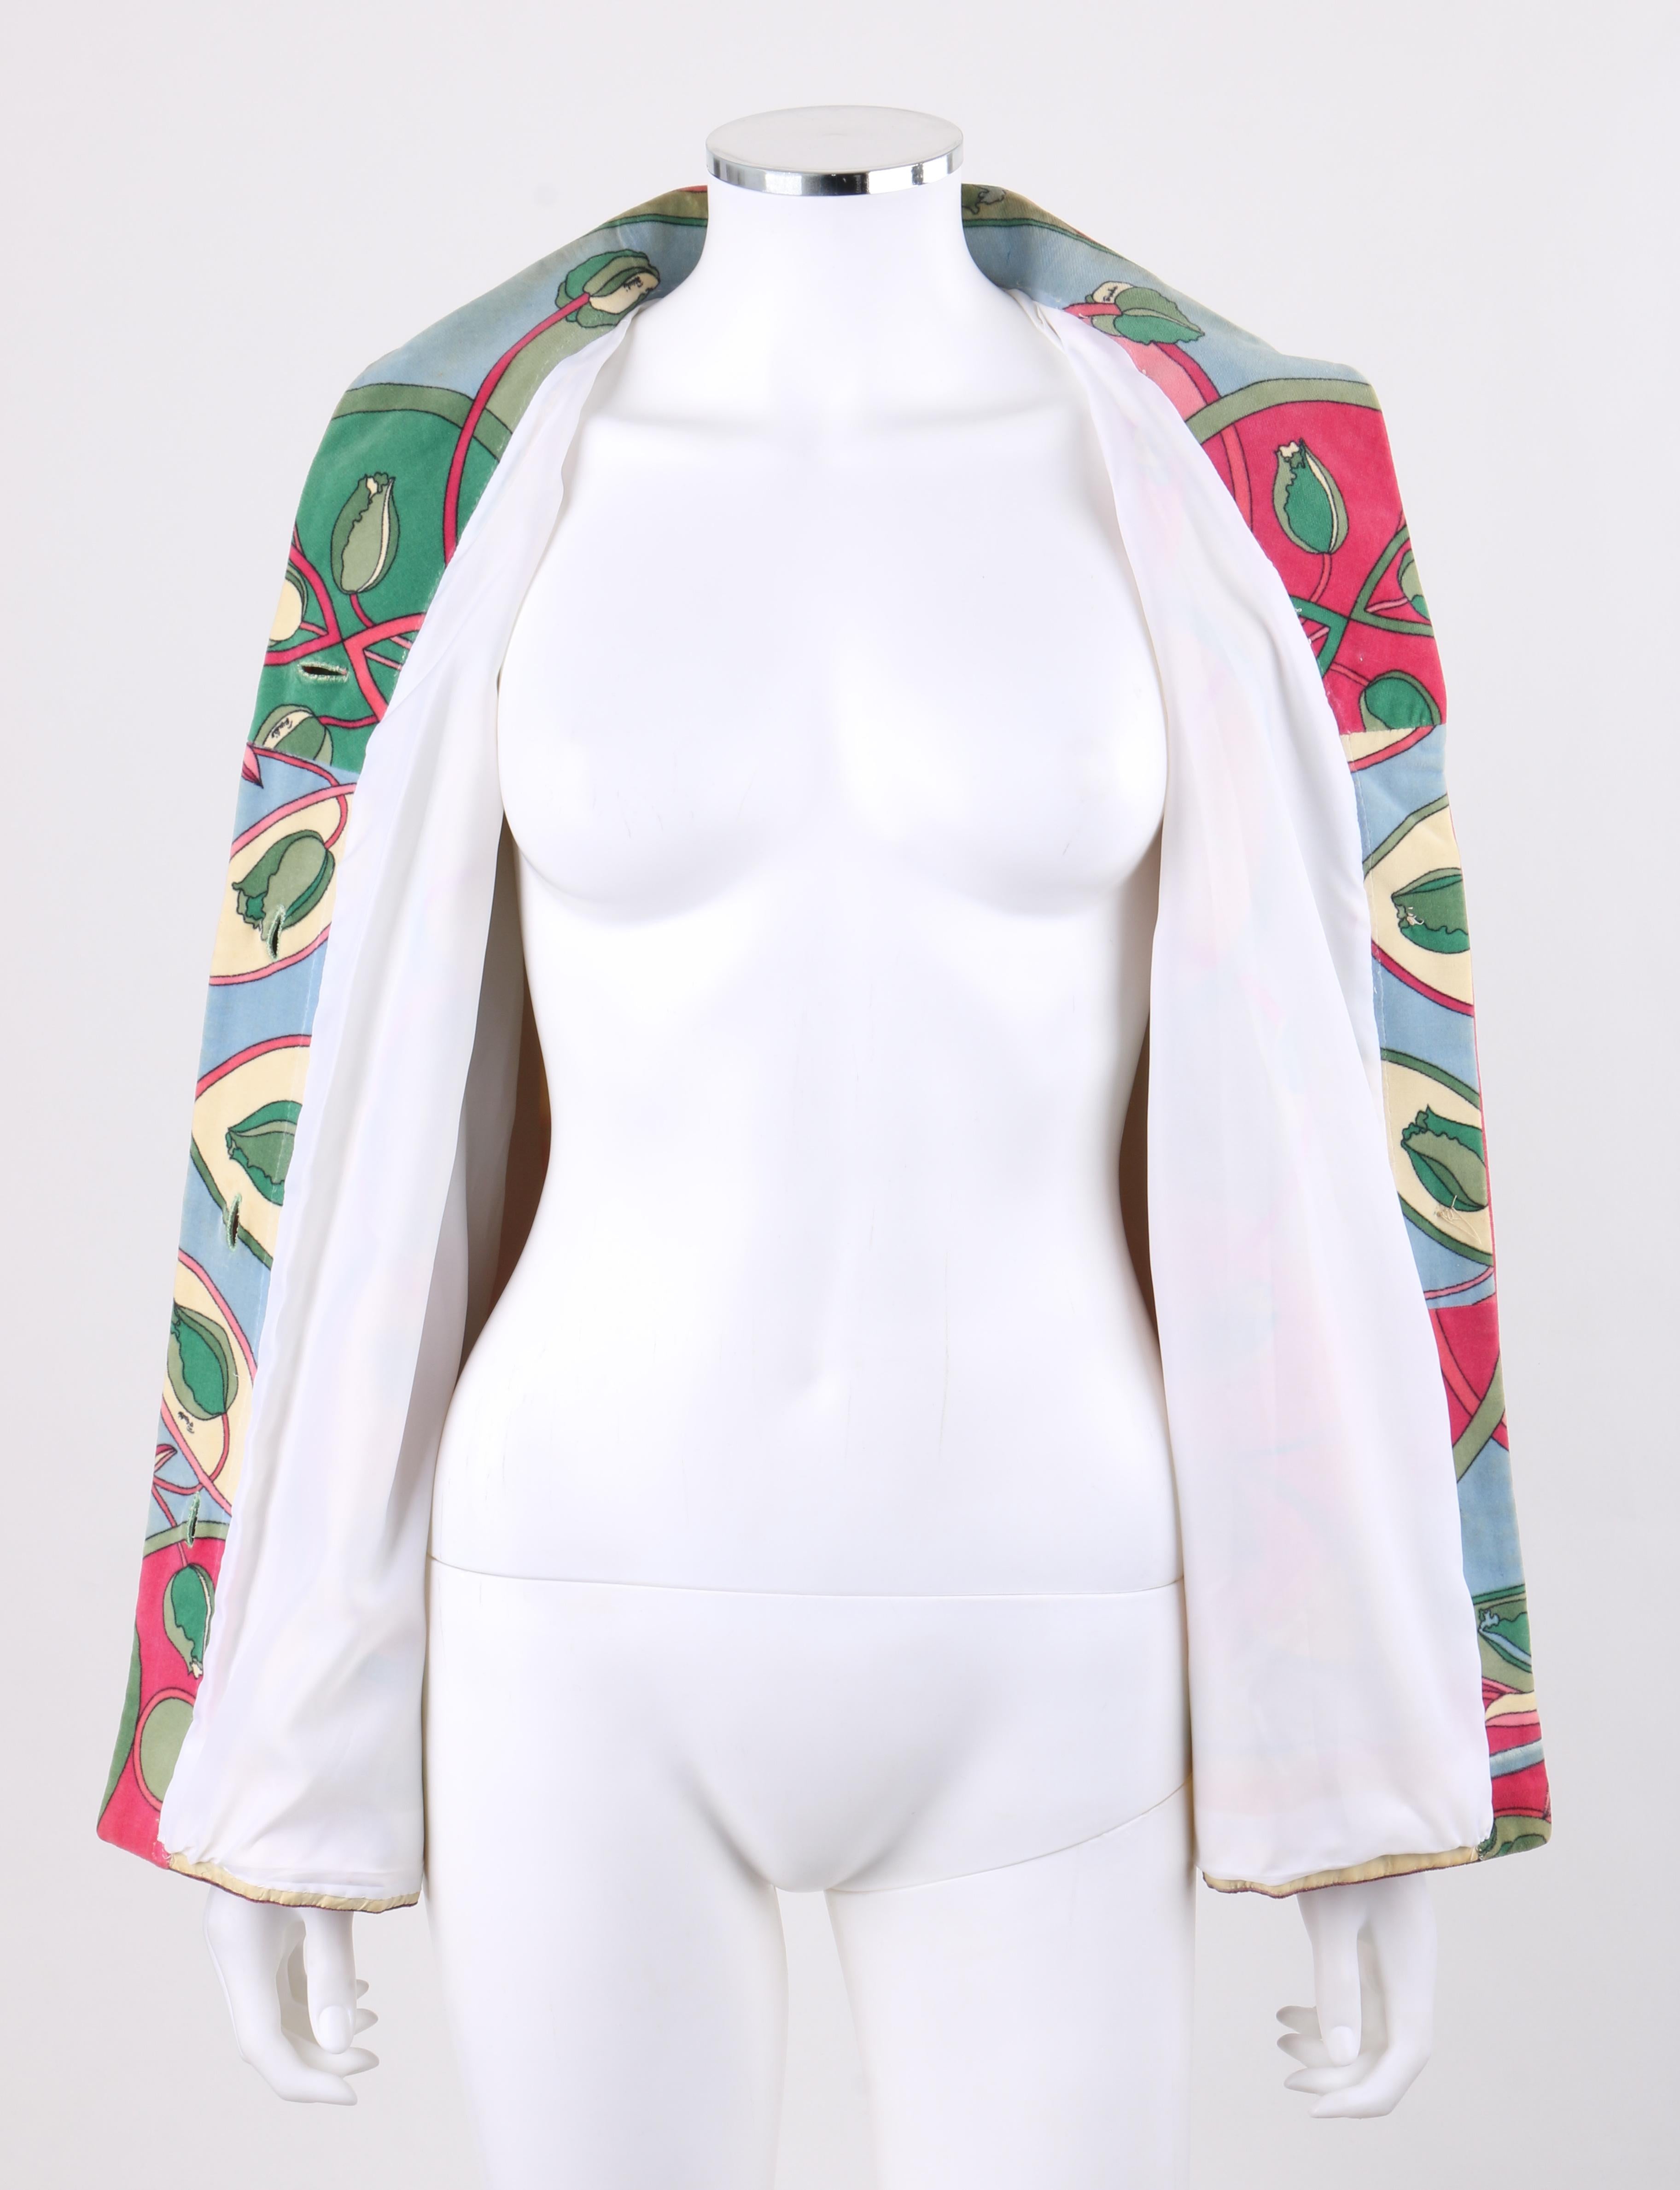 EMILIO PUCCI c.1960’s Multicolor Tulip Floral Velvet Button Front Jacket In Good Condition For Sale In Thiensville, WI